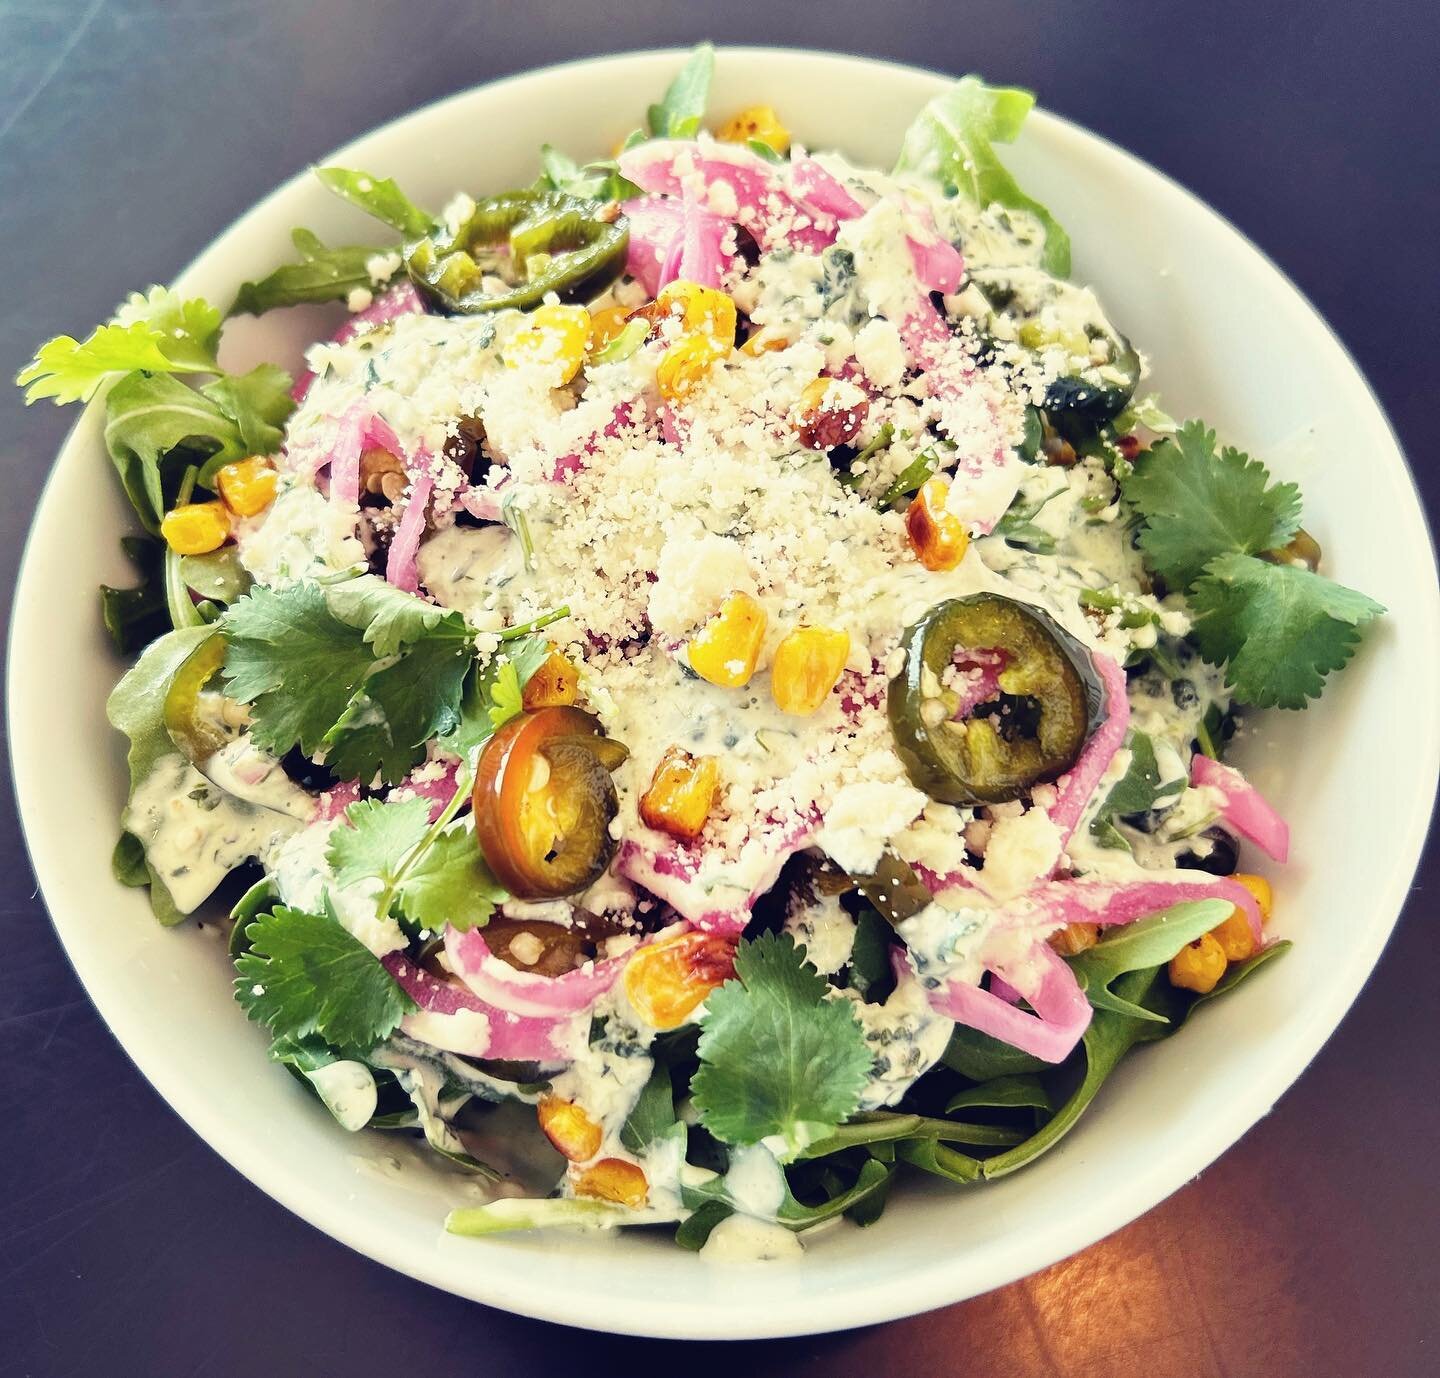 ✨It&rsquo;s FRIDAY✨
The sun is FINALLY out and we are ready to start celebrating the weekend!!!! 
Today&rsquo;s feature: Mexican Street Corn Salad!
*Arugula
*Cilantro
*Charred Corn 
*Pickled Red Onion
*Cotija Cheese
*Candied Jalape&ntilde;o 
*Cilantr